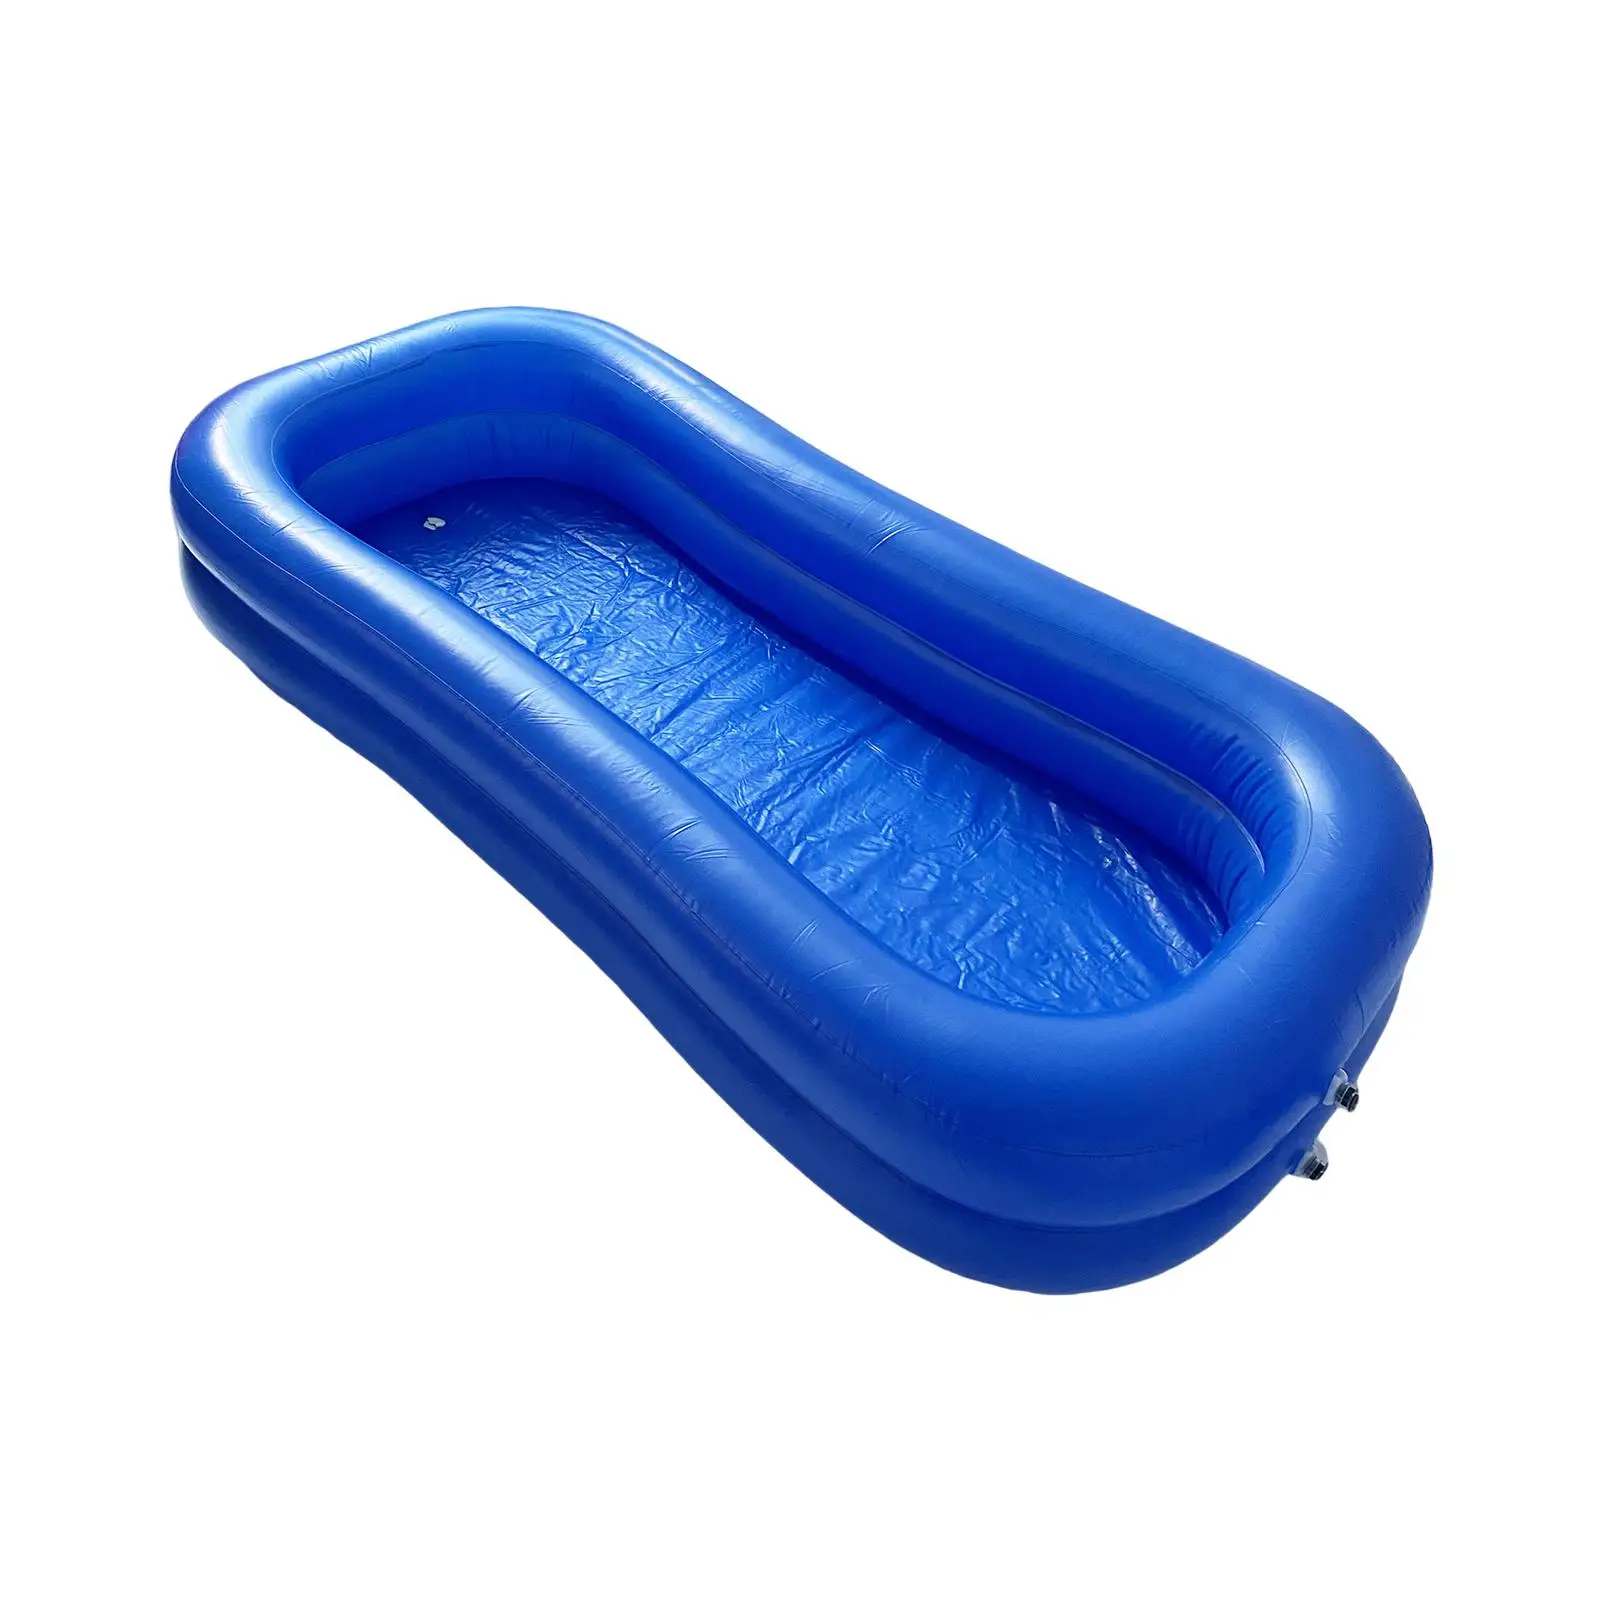 Inflatable Bathtub Foldable Bath in Bed Assist Aid Body Washing Basin System for Disabled Handicapped Bedridden Adults Seniors